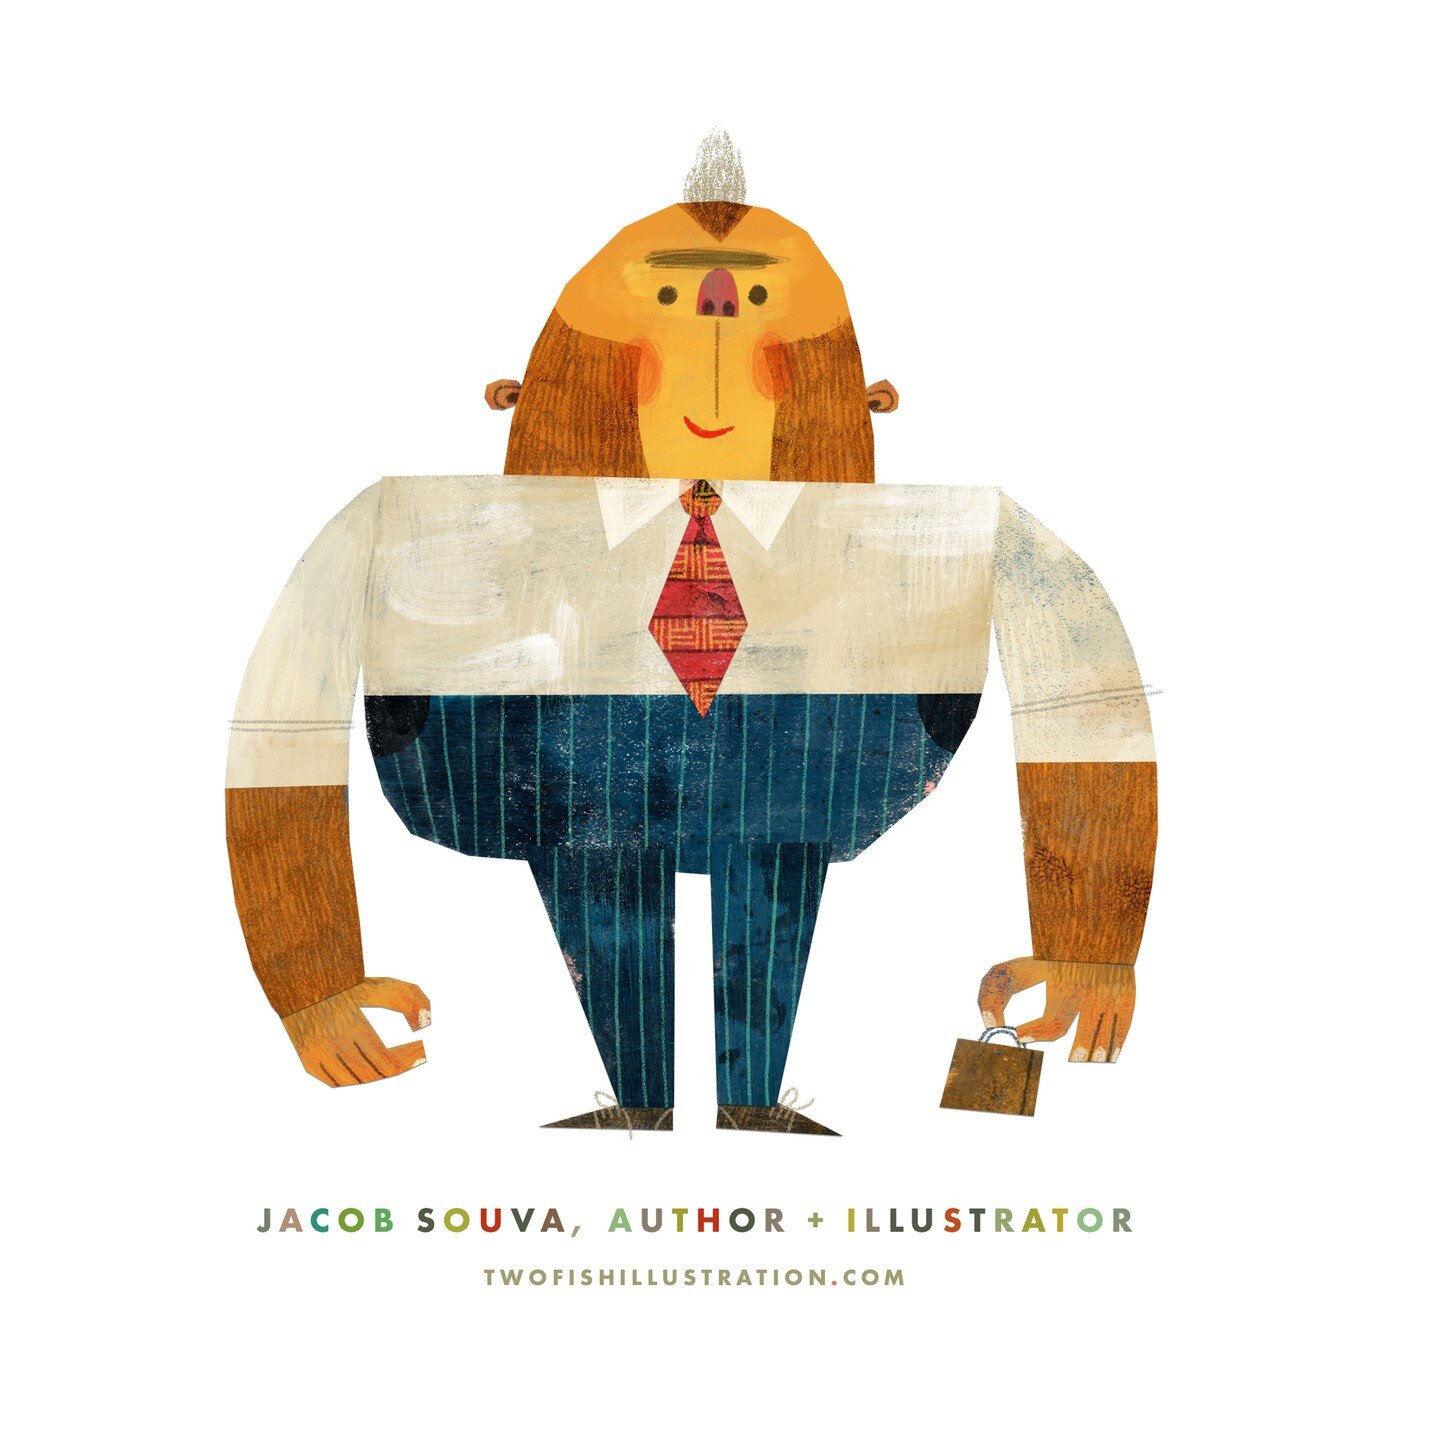 Hey! It's #kidlitpostcard day. I'm a #kidlitart illustrator and author forever looking for stories that are funny, witty, and have heart. Like what you might find in this ape's briefcase.

#kidlit #picturebook #childrensbook #childrensbooks #kidsbook